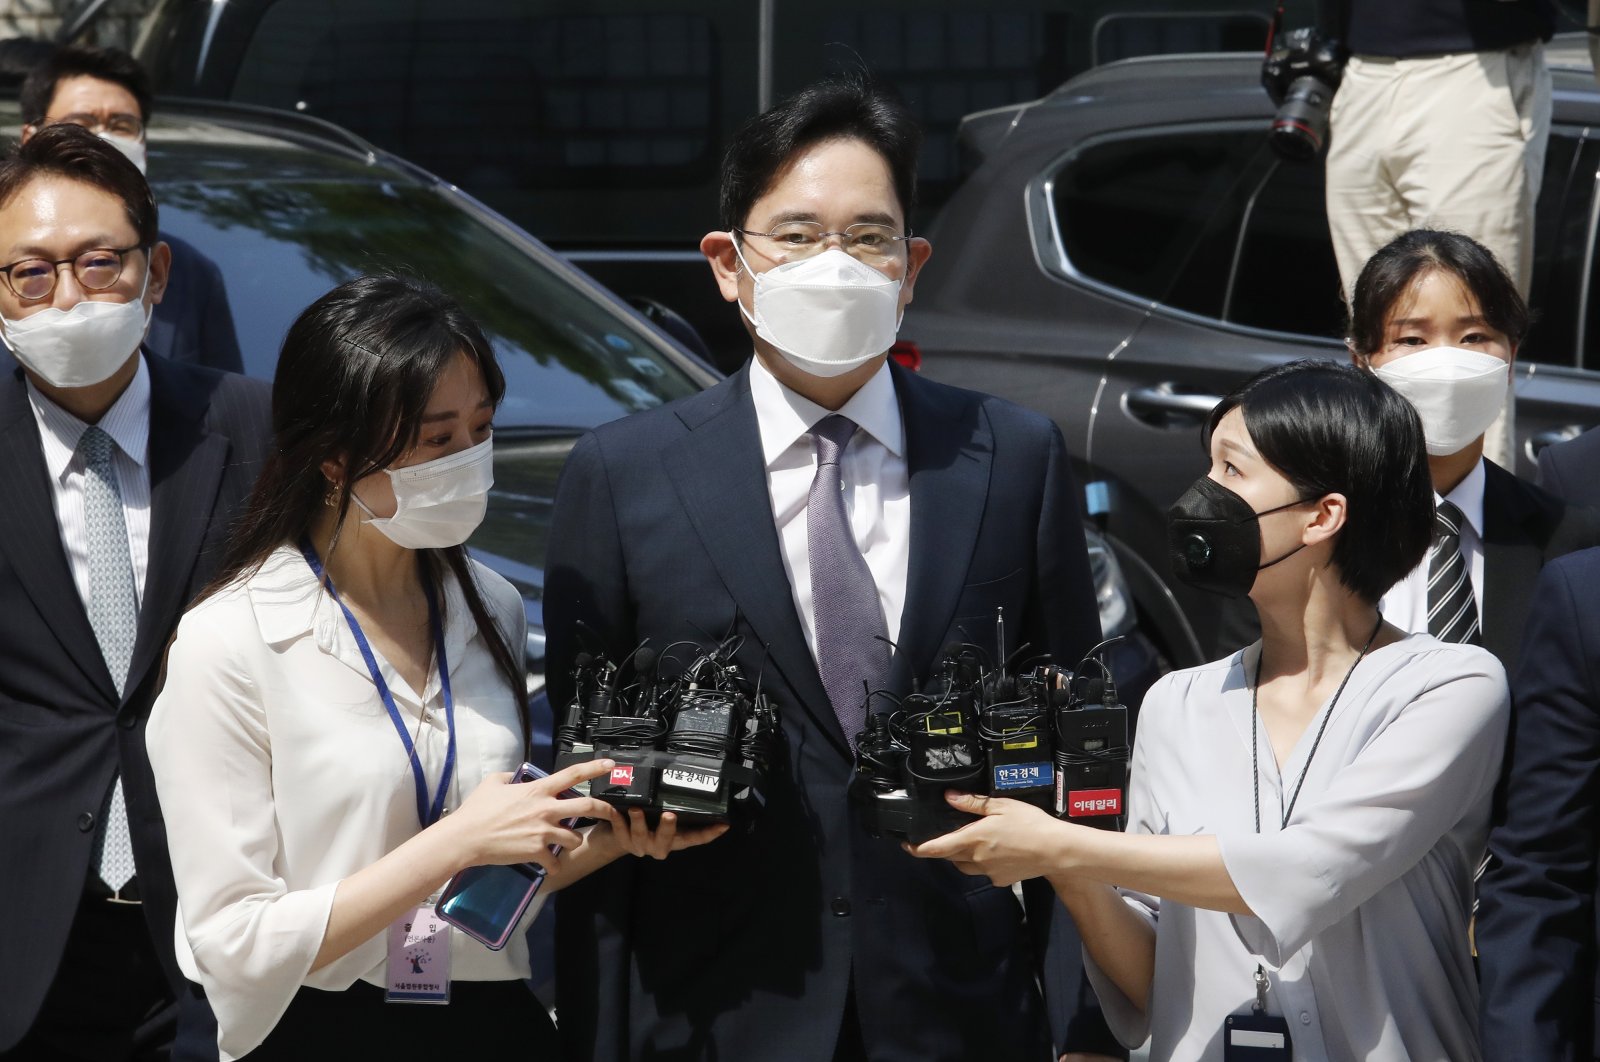 Samsung Electronics Vice Chairman Lee Jae-yong (C), arrives at the Seoul Central District Court in Seoul, South Korea, June 8, 2020. (AP Photo)